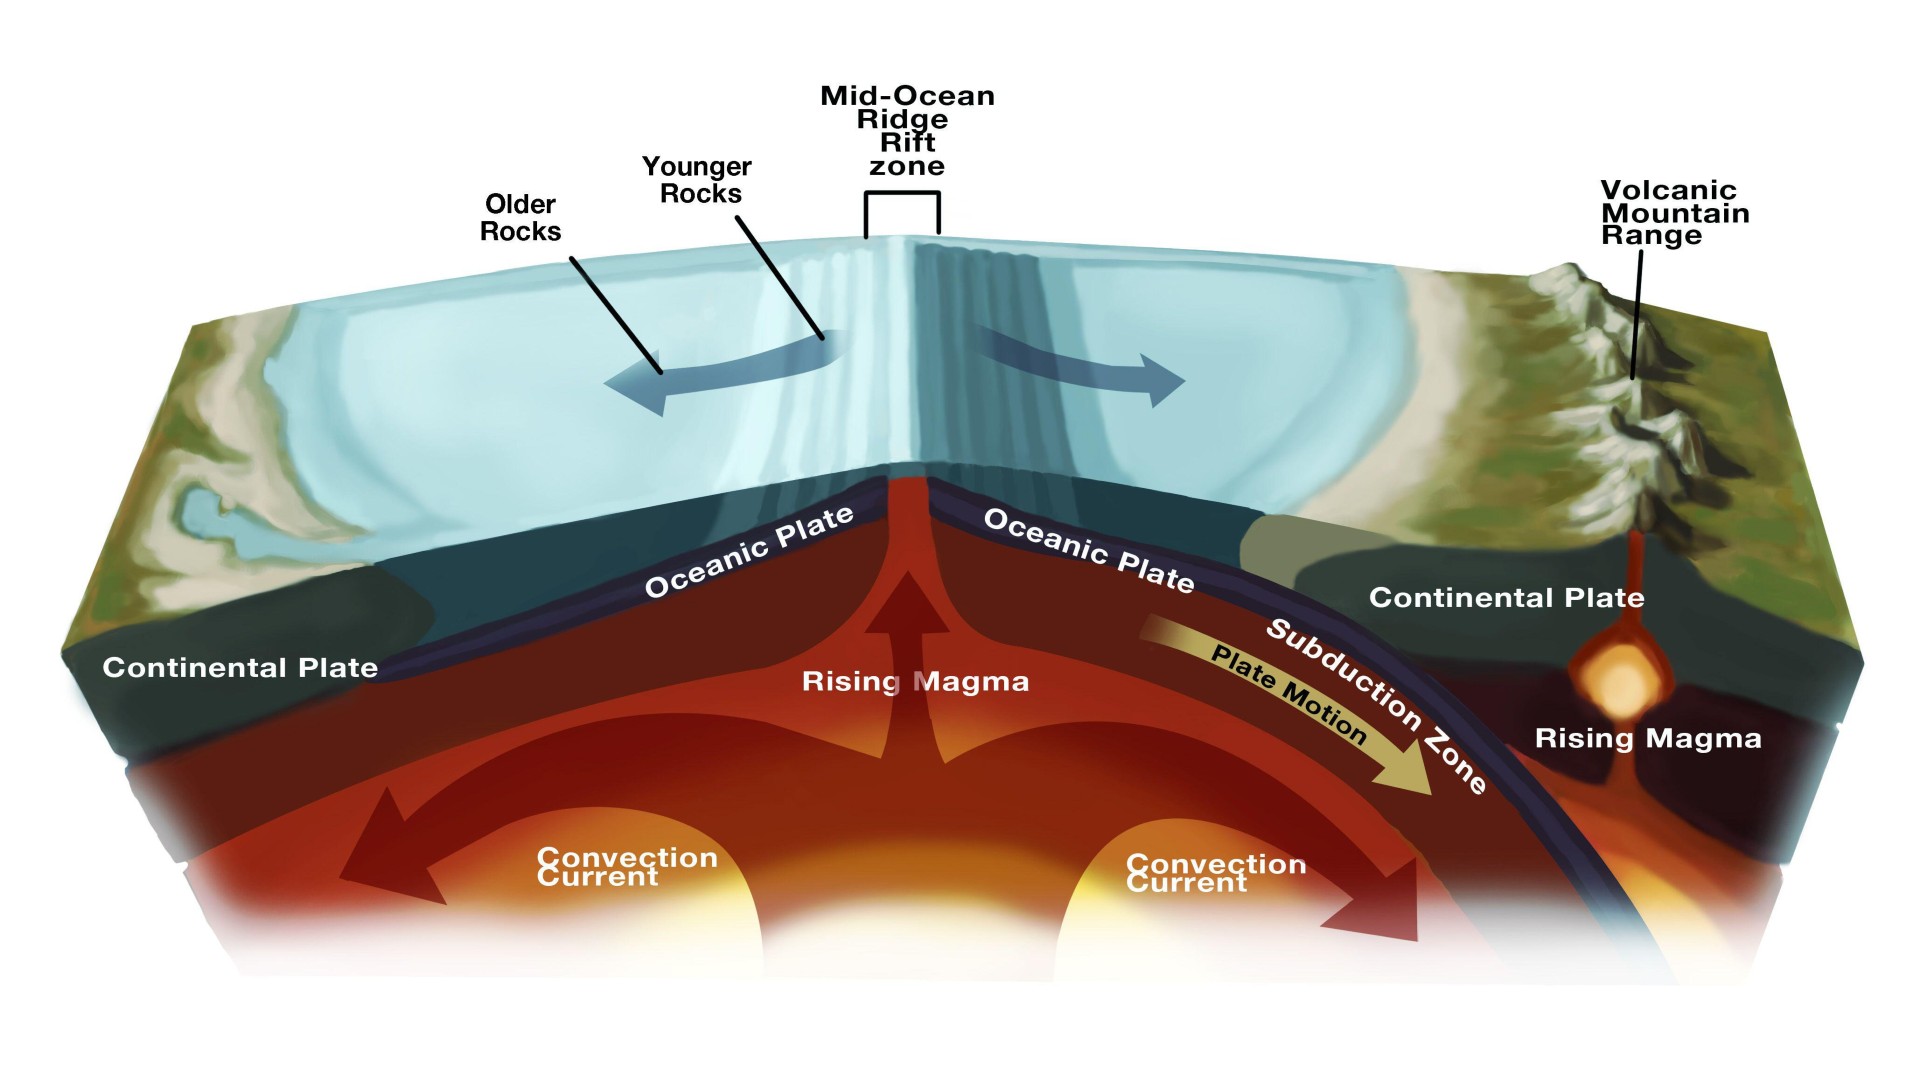 subduction zones on earth